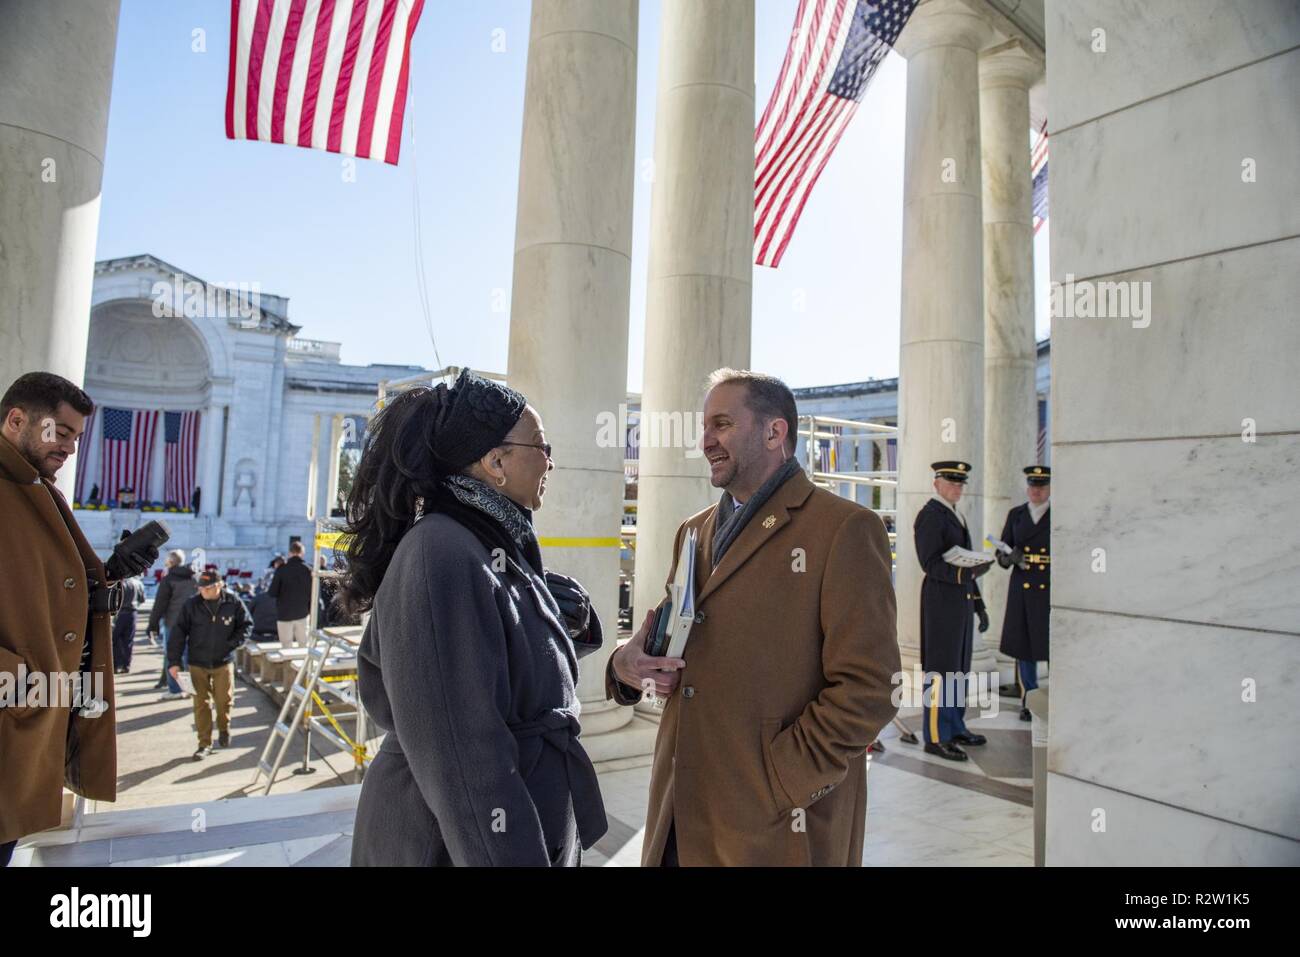 Adrienne Combs (center), deputy public affairs officer, Military District of Washington; speaks with Micheal Migliara (right), director of operations, Arlington National Cemetery, during the Veterans Day Observance in the Memorial Amphitheater at Arlington National Cemetery, Arlington, Virginia, Nov. 11, 2018. Stock Photo